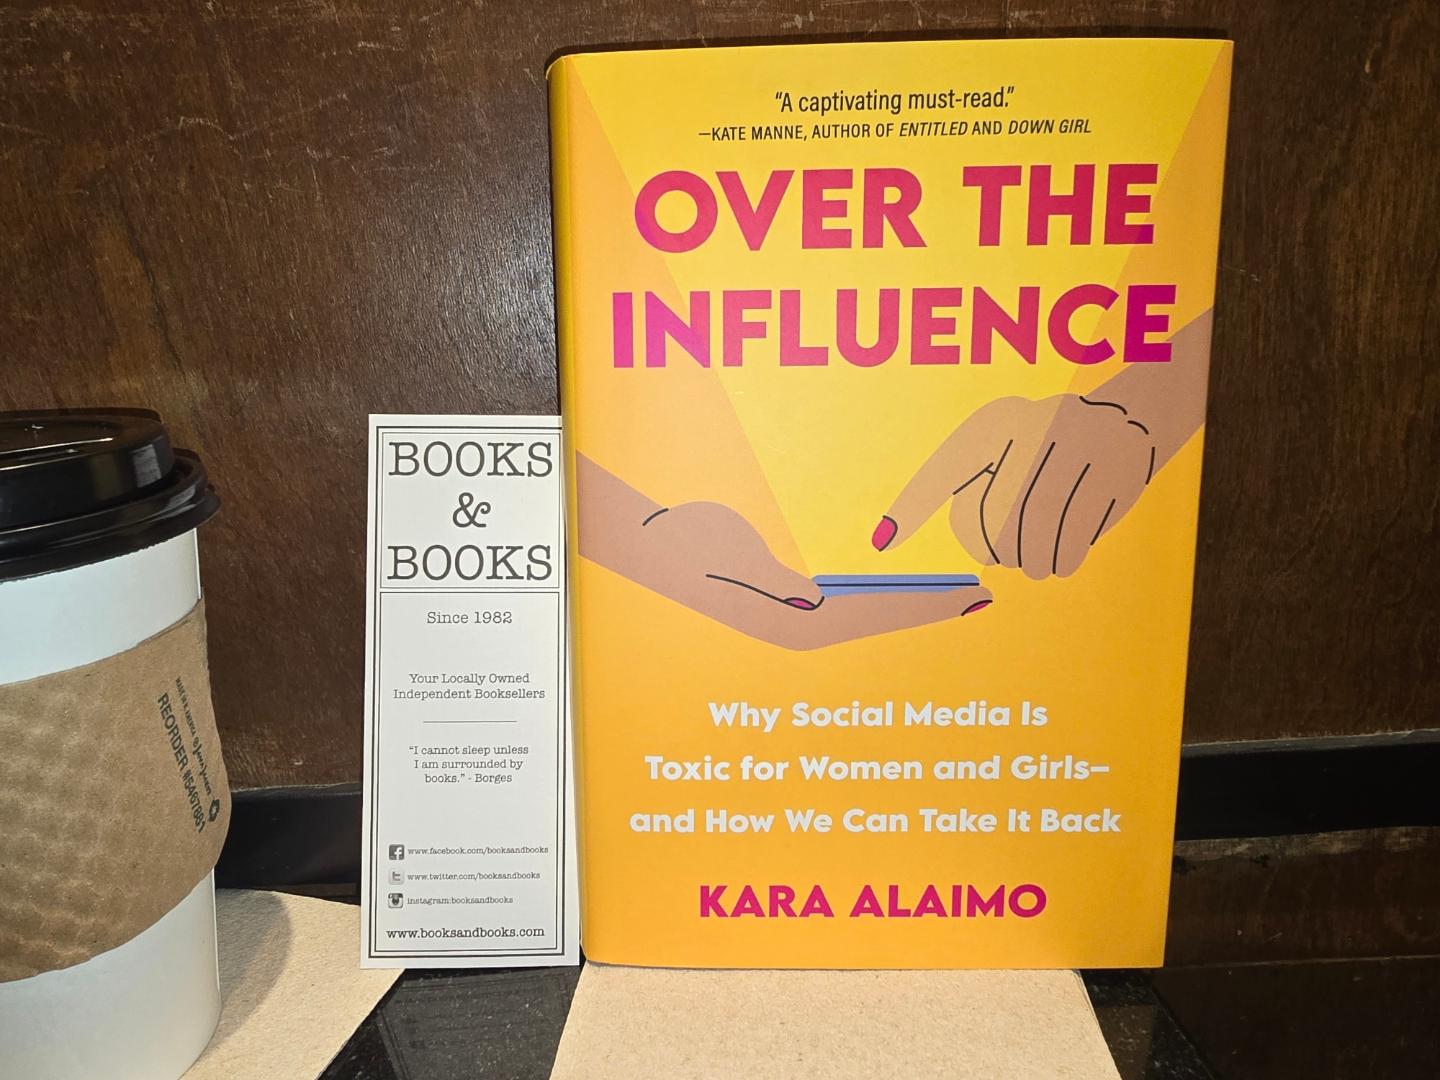 Over the Influence with Kara Alaimo at Books & Books in Coral Gables (Miami)